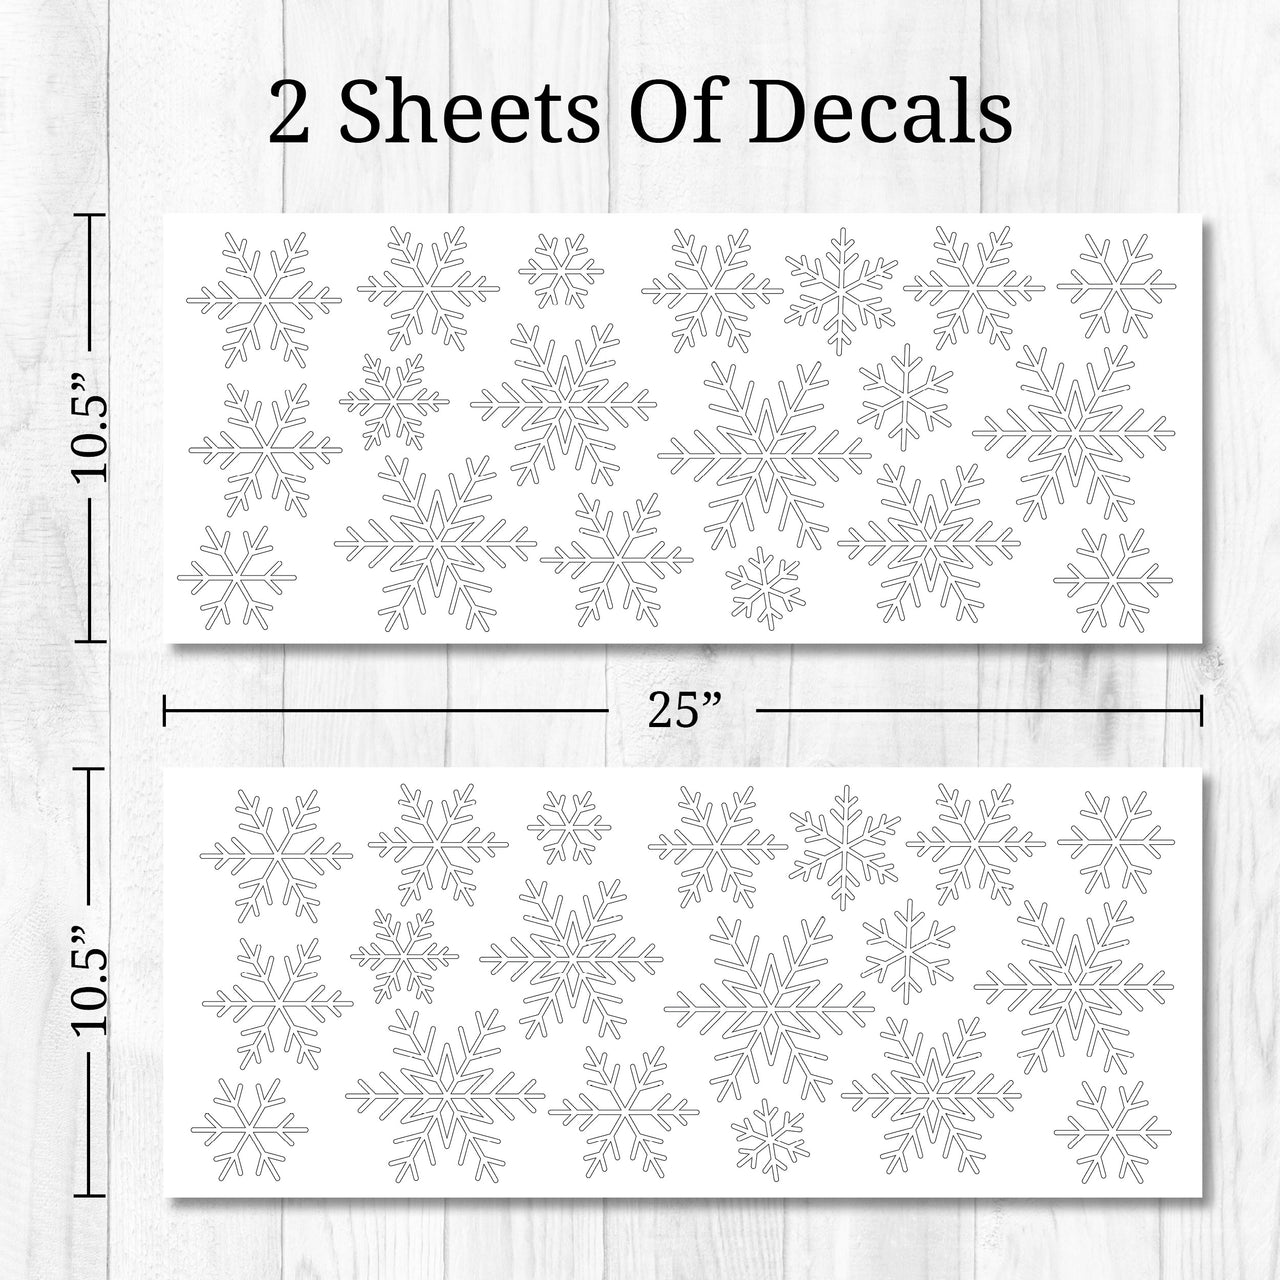 Snowflakes Wall Decals